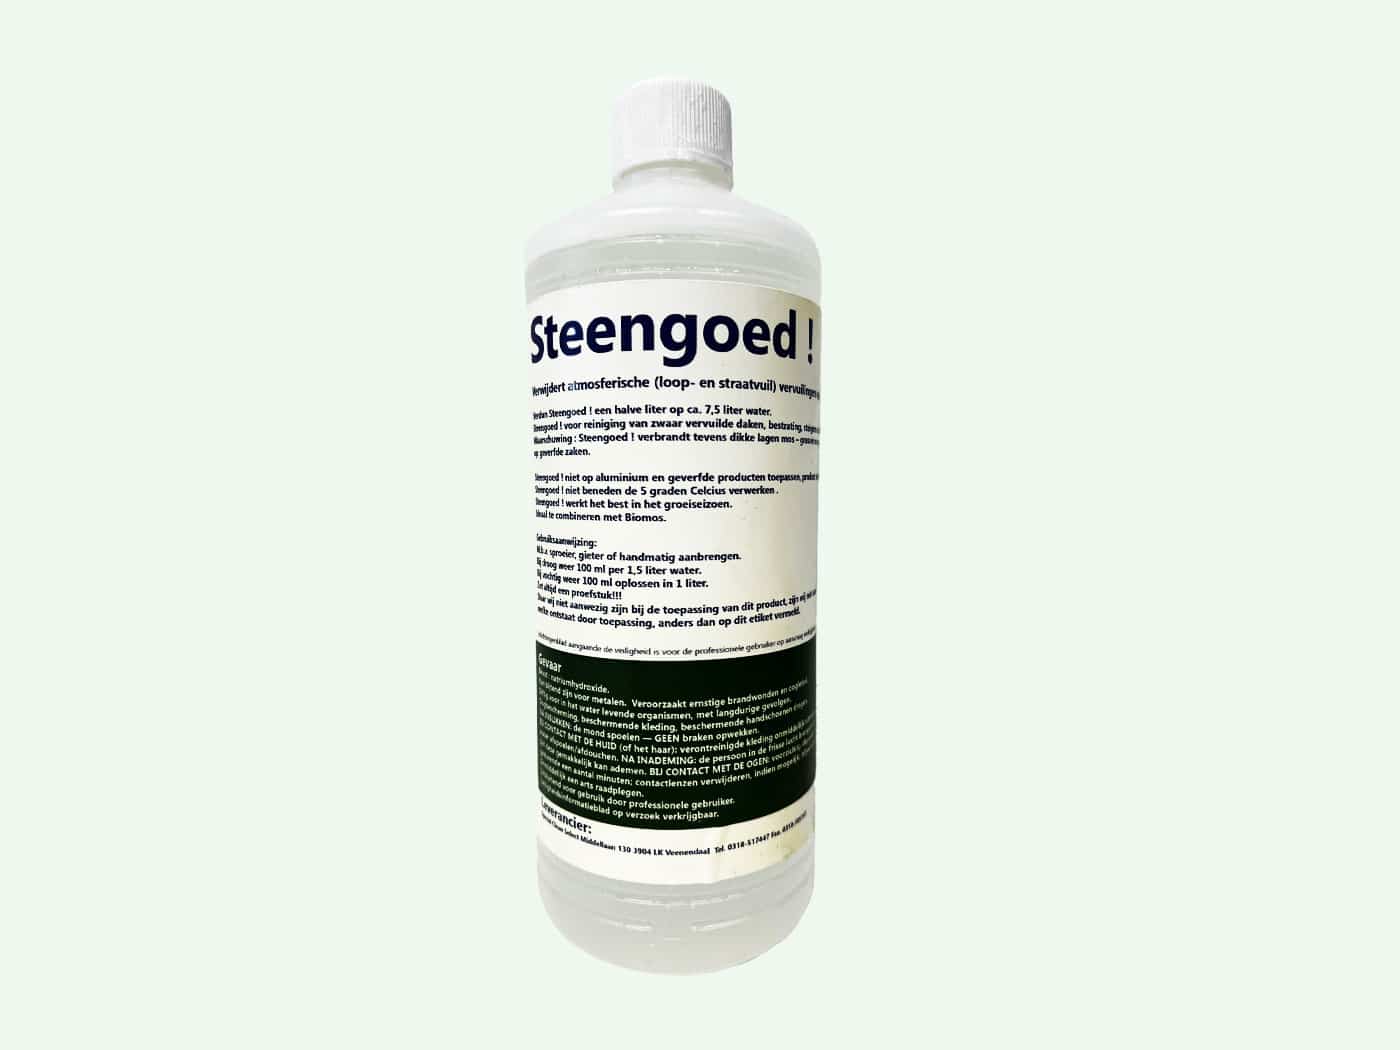 Steengoed-product